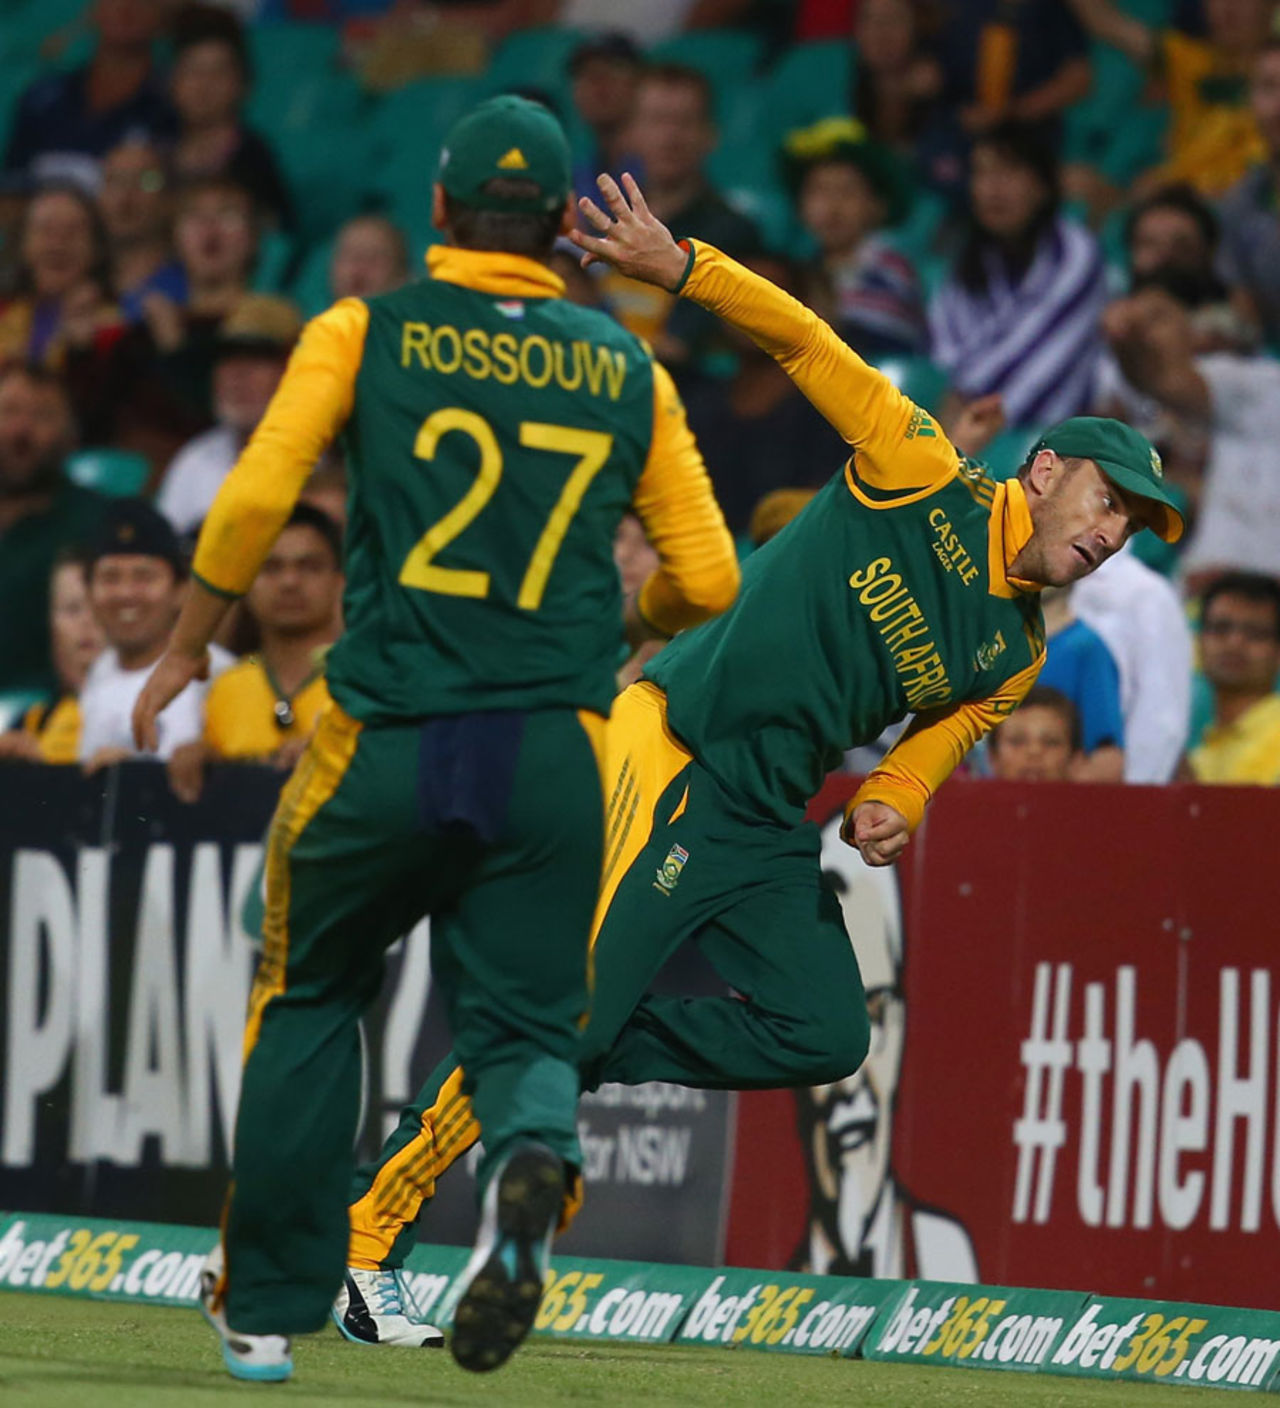 Faf du Plessis lobs the ball back towards Rilee Rossouw to orchestrate a smart catch, Australia v South Africa, 5th ODI, Sydney, November 23, 2014